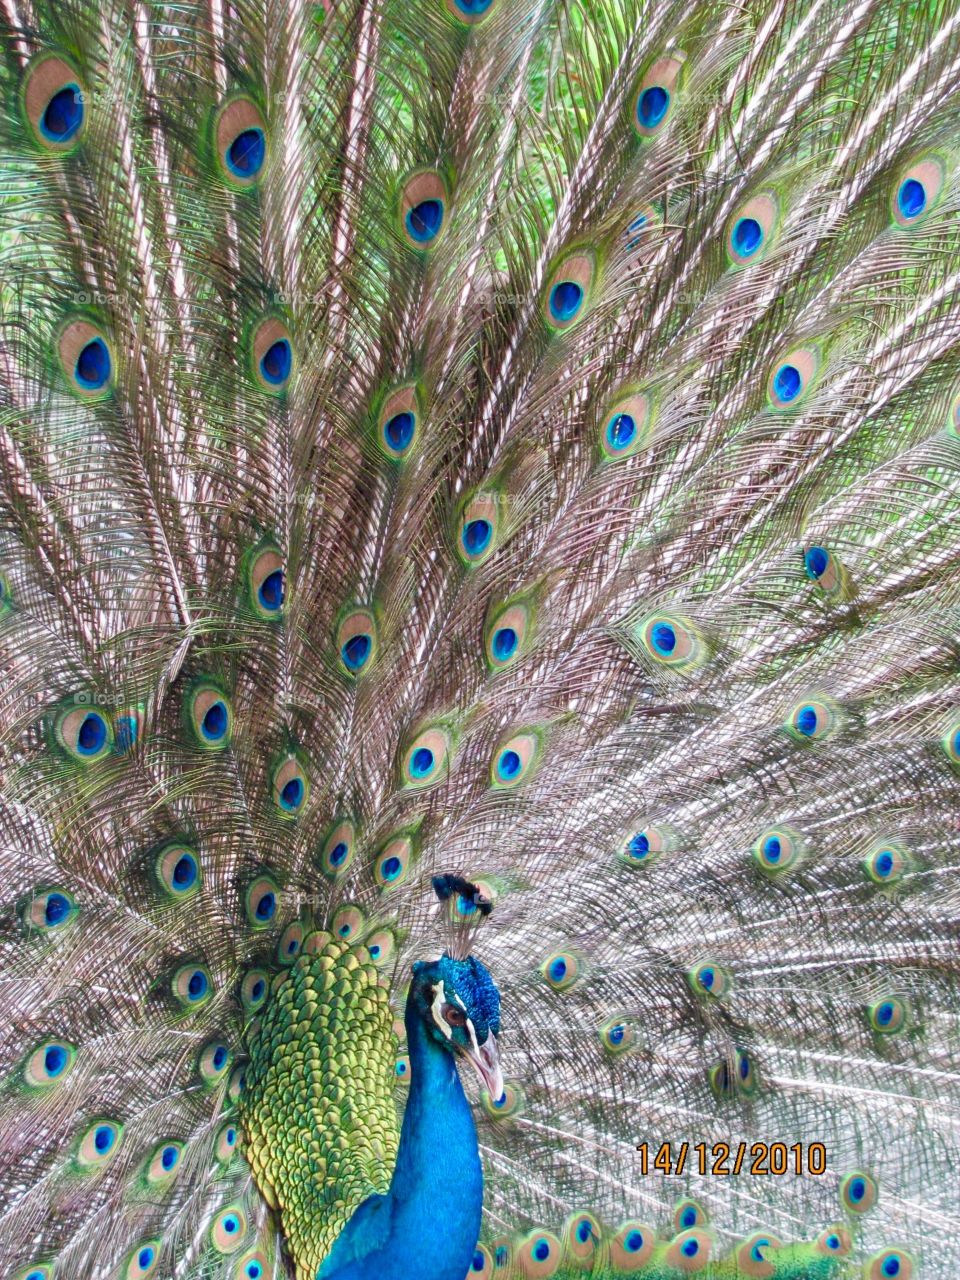 Nothing compares to the grace, beauty & pride of a Peacock !!